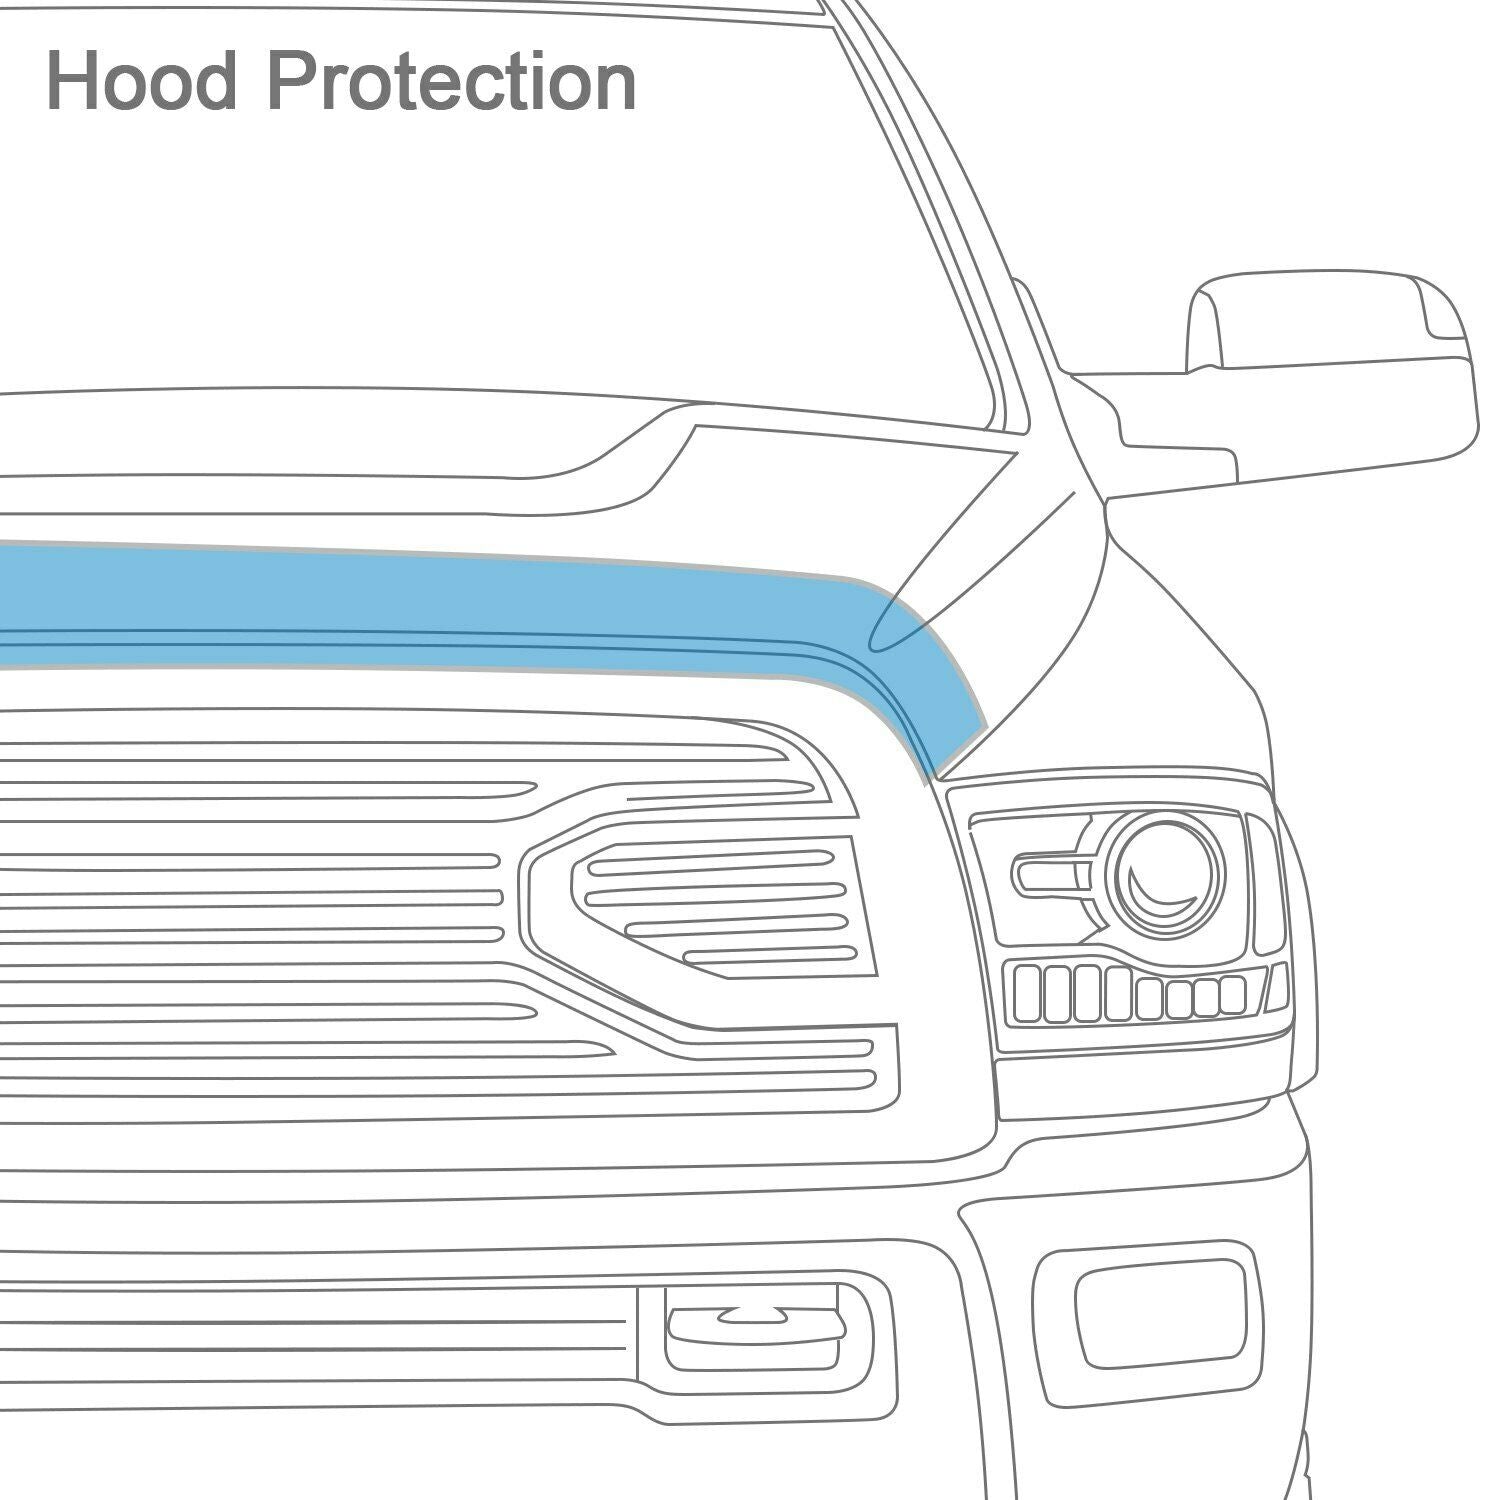 AVS Low Profile Hoodflector Protector Bug Shield For 03-06 Ford Expedition 21323